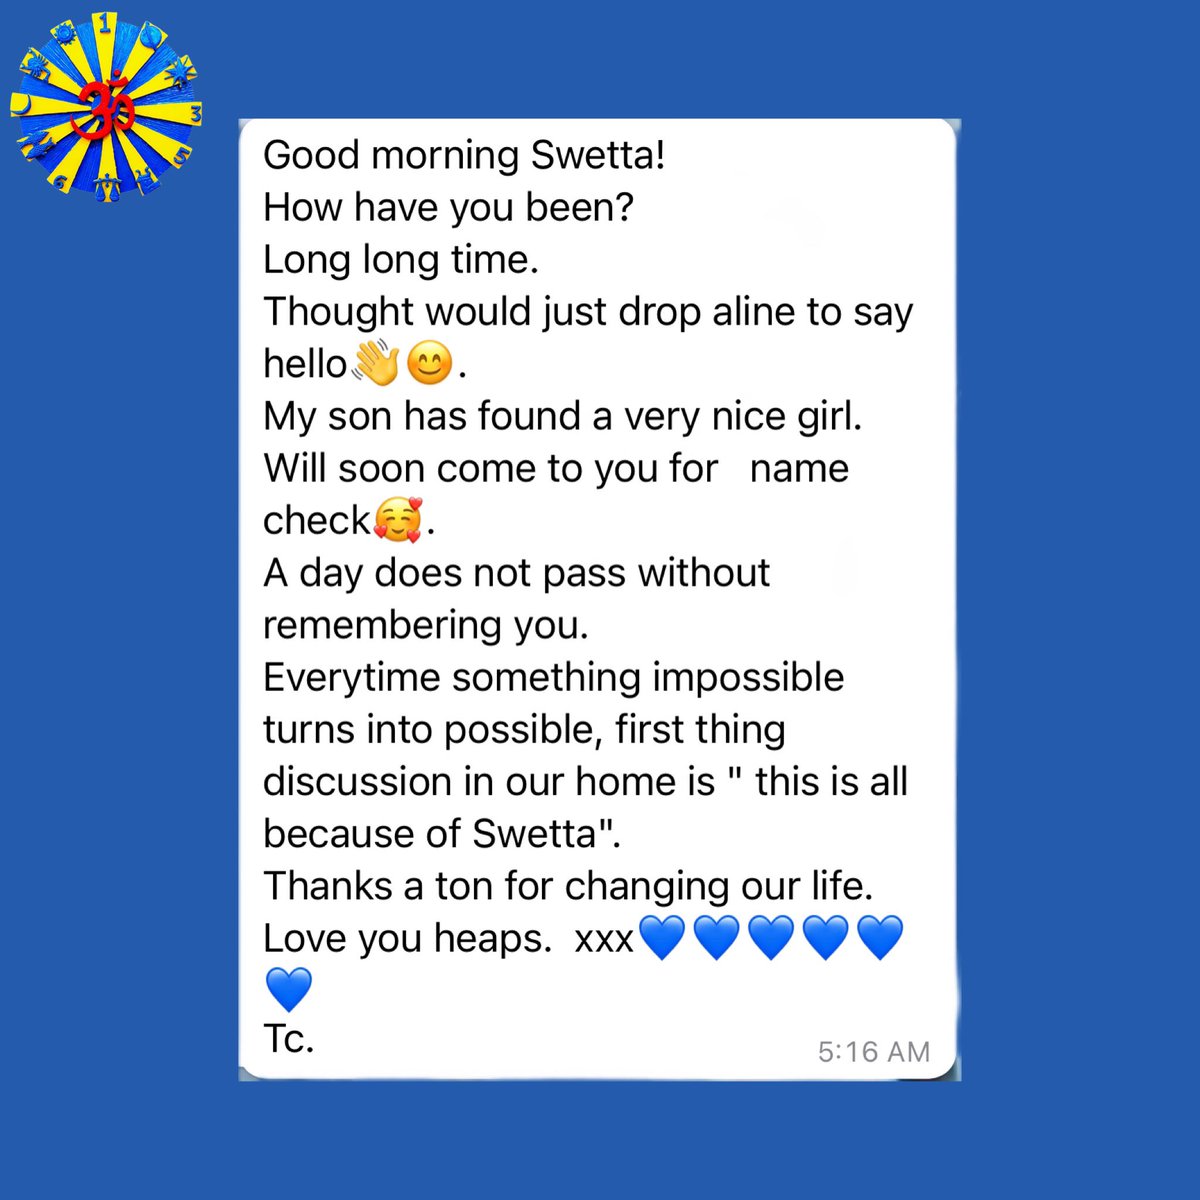 Time passes in a flash when your work has touched several lives for good… #forevergreatful to my science #Numerology 💙

#messageslikethese #mademymorning #HeartfeltMessages #Numbers #MyScience  #NumbersDontLie #LuckyNumbers #MagicOfBlue #Jumaani #SwettaJumaani